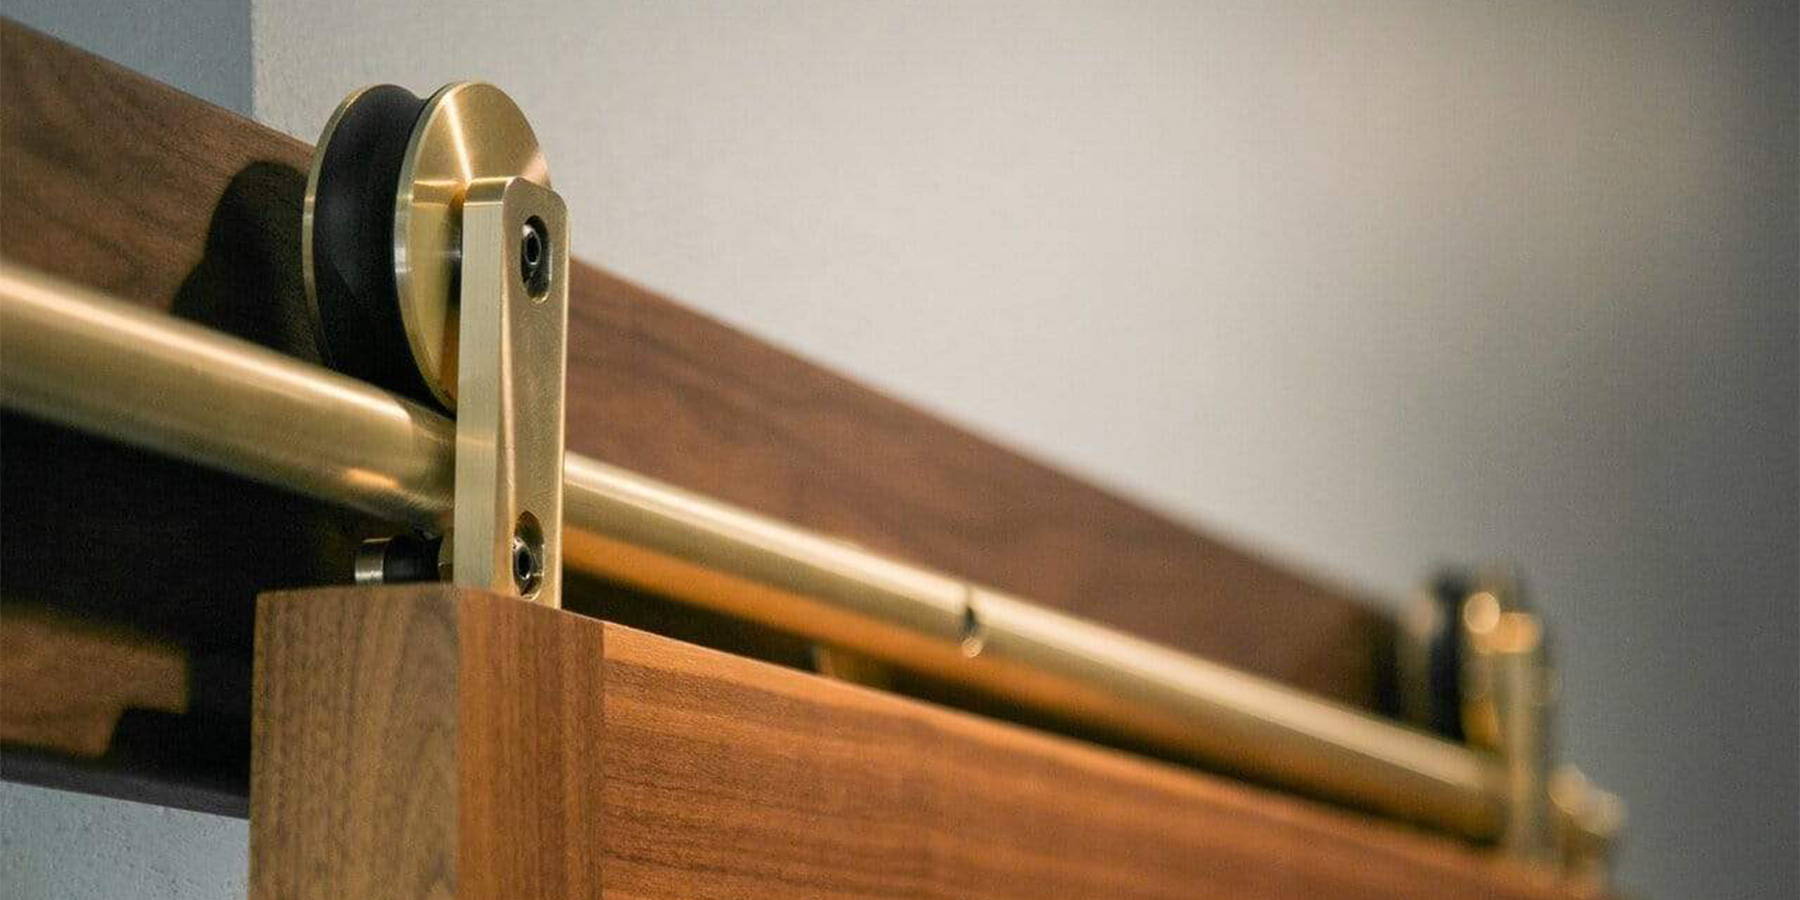 Solid Brass Swiss Rod hardware installed on a sapele mahogany door